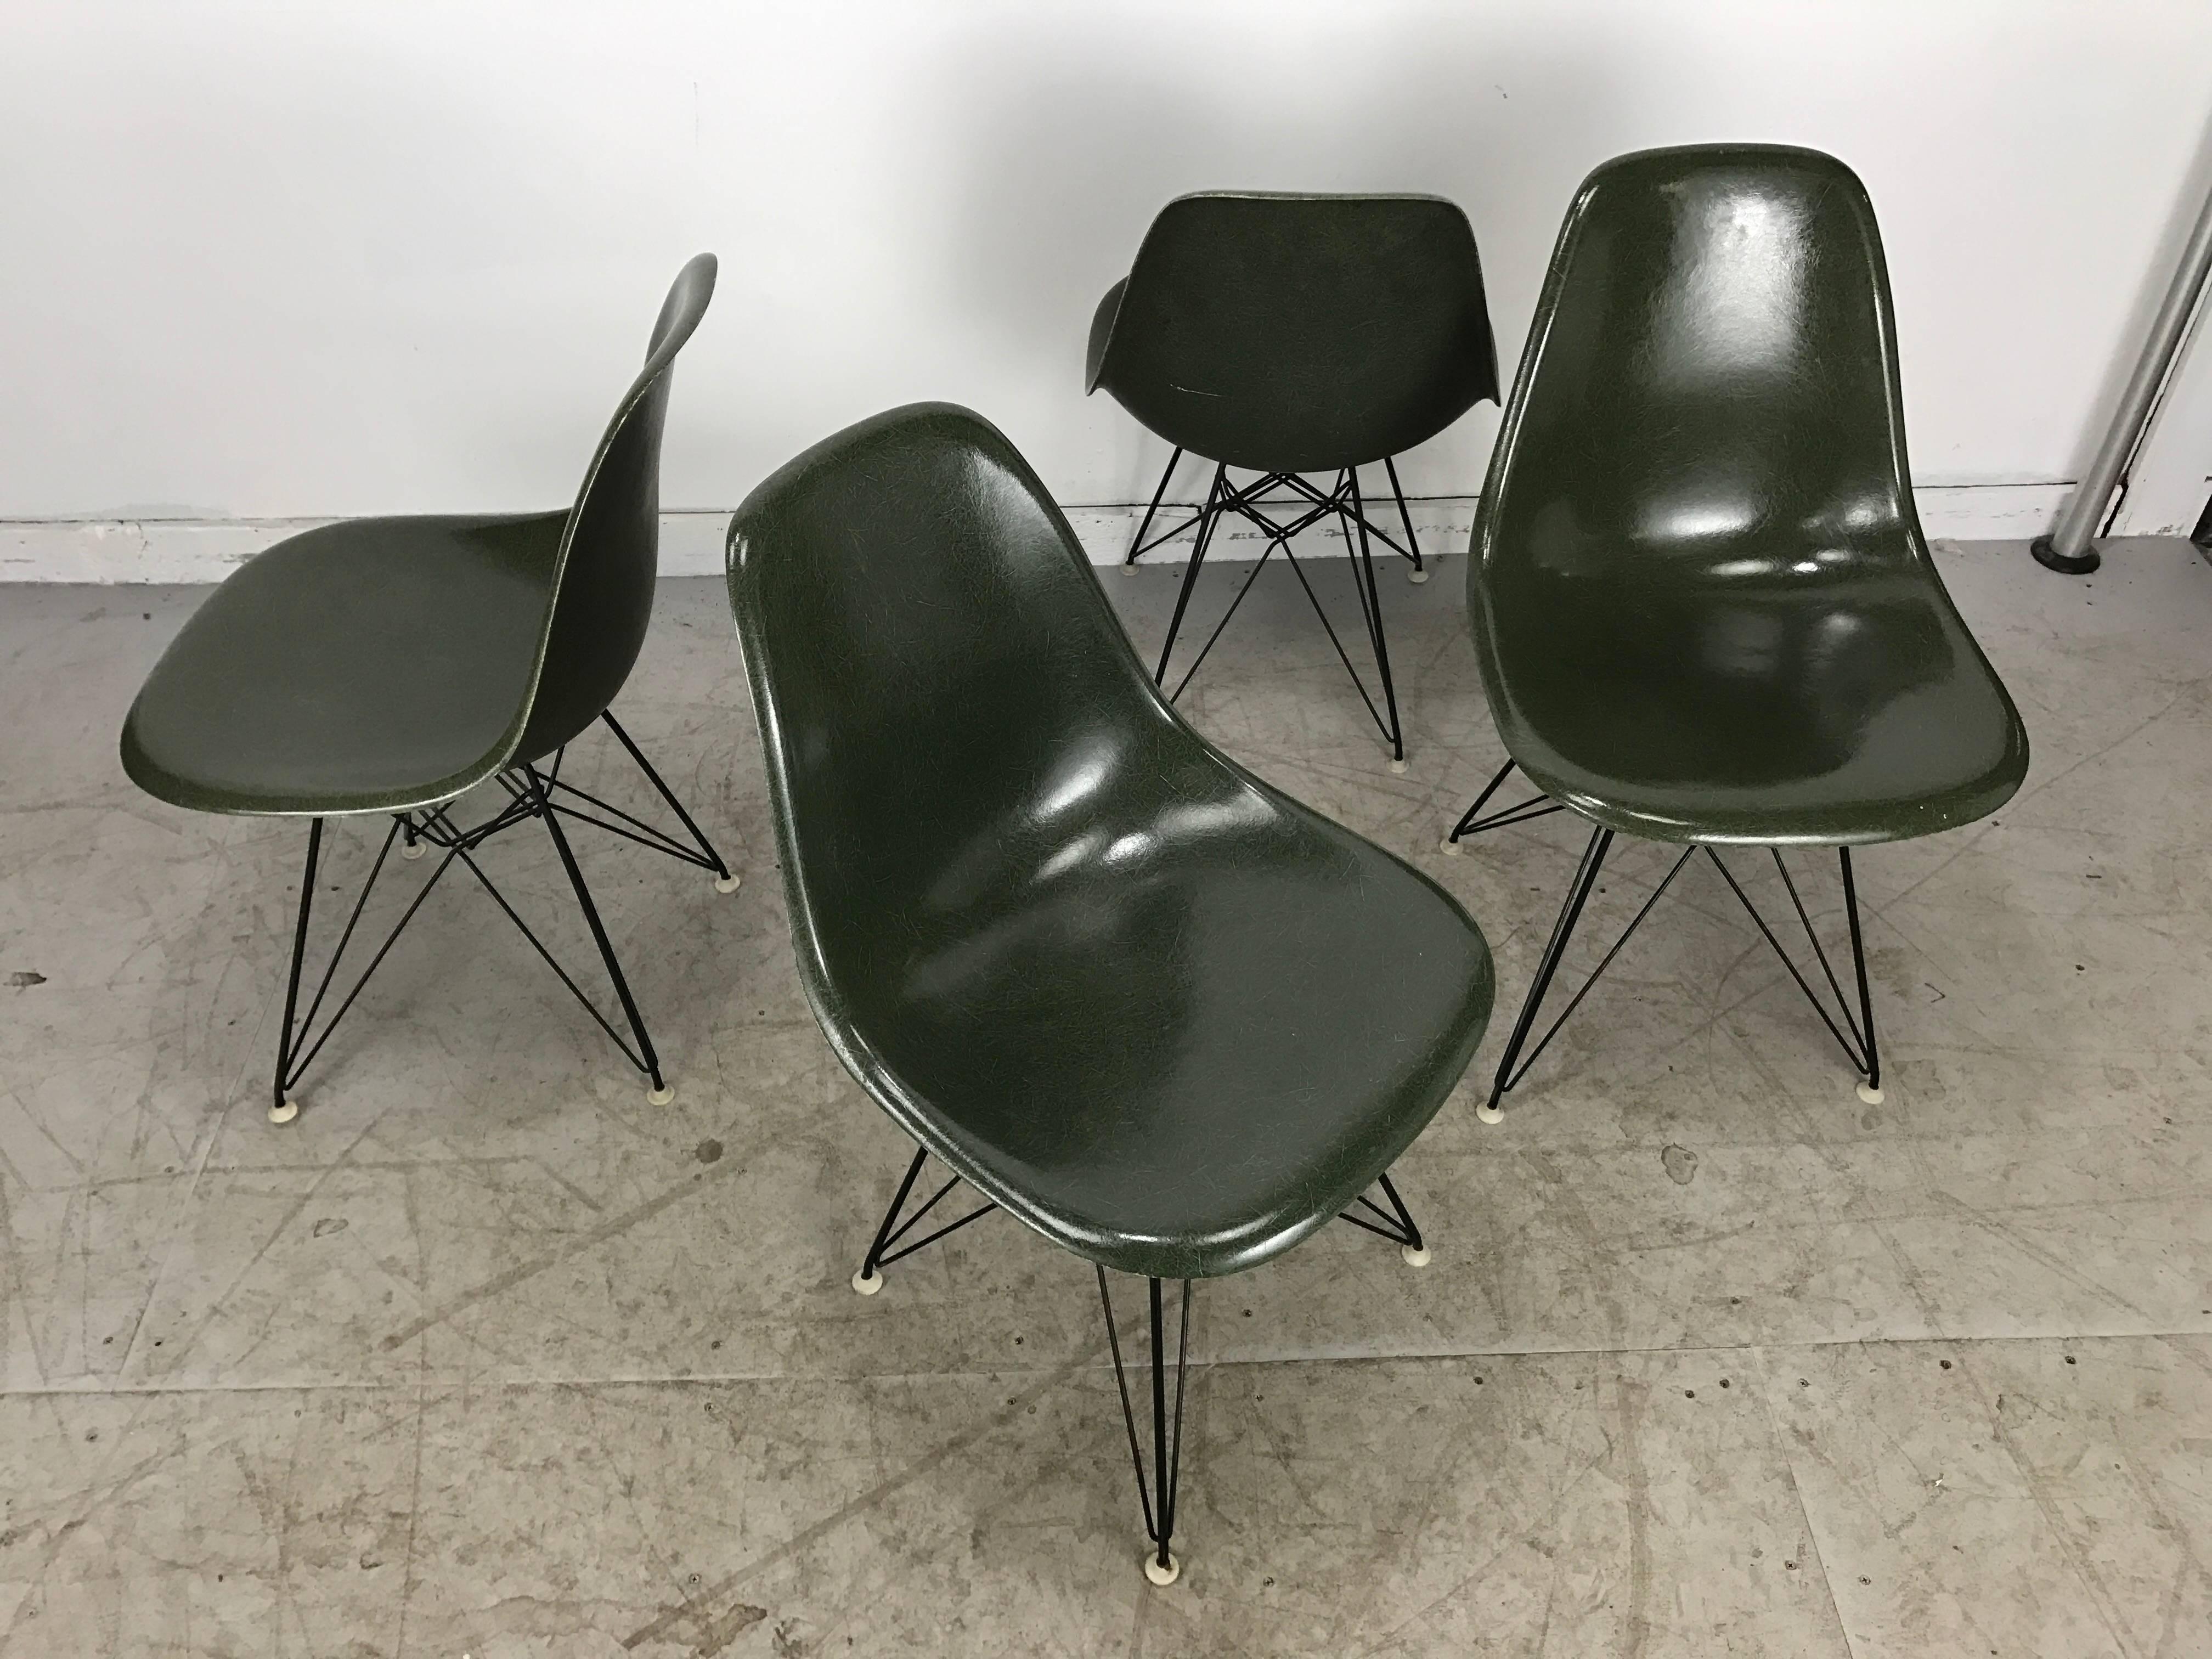 Nice early set of four Eiffel Tower wire base side chairs(scoops) designed by Charles and Ray Eames for Herman Miller, Elusive green color wonderful exposed fibres gel coat. Nice original condition.